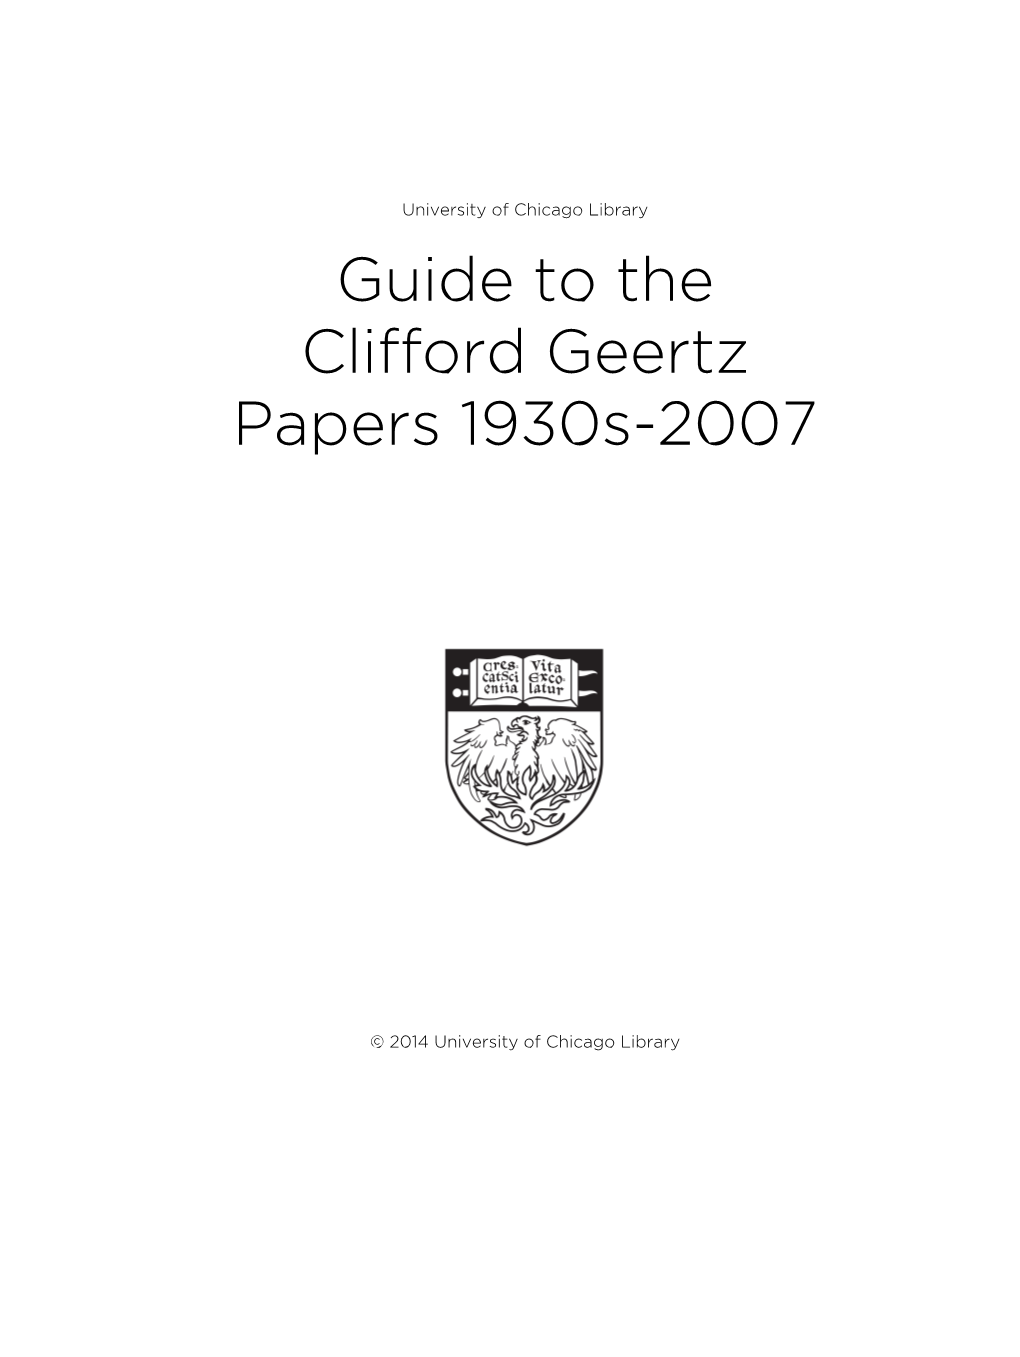 Guide to the Clifford Geertz Papers 1930S-2007